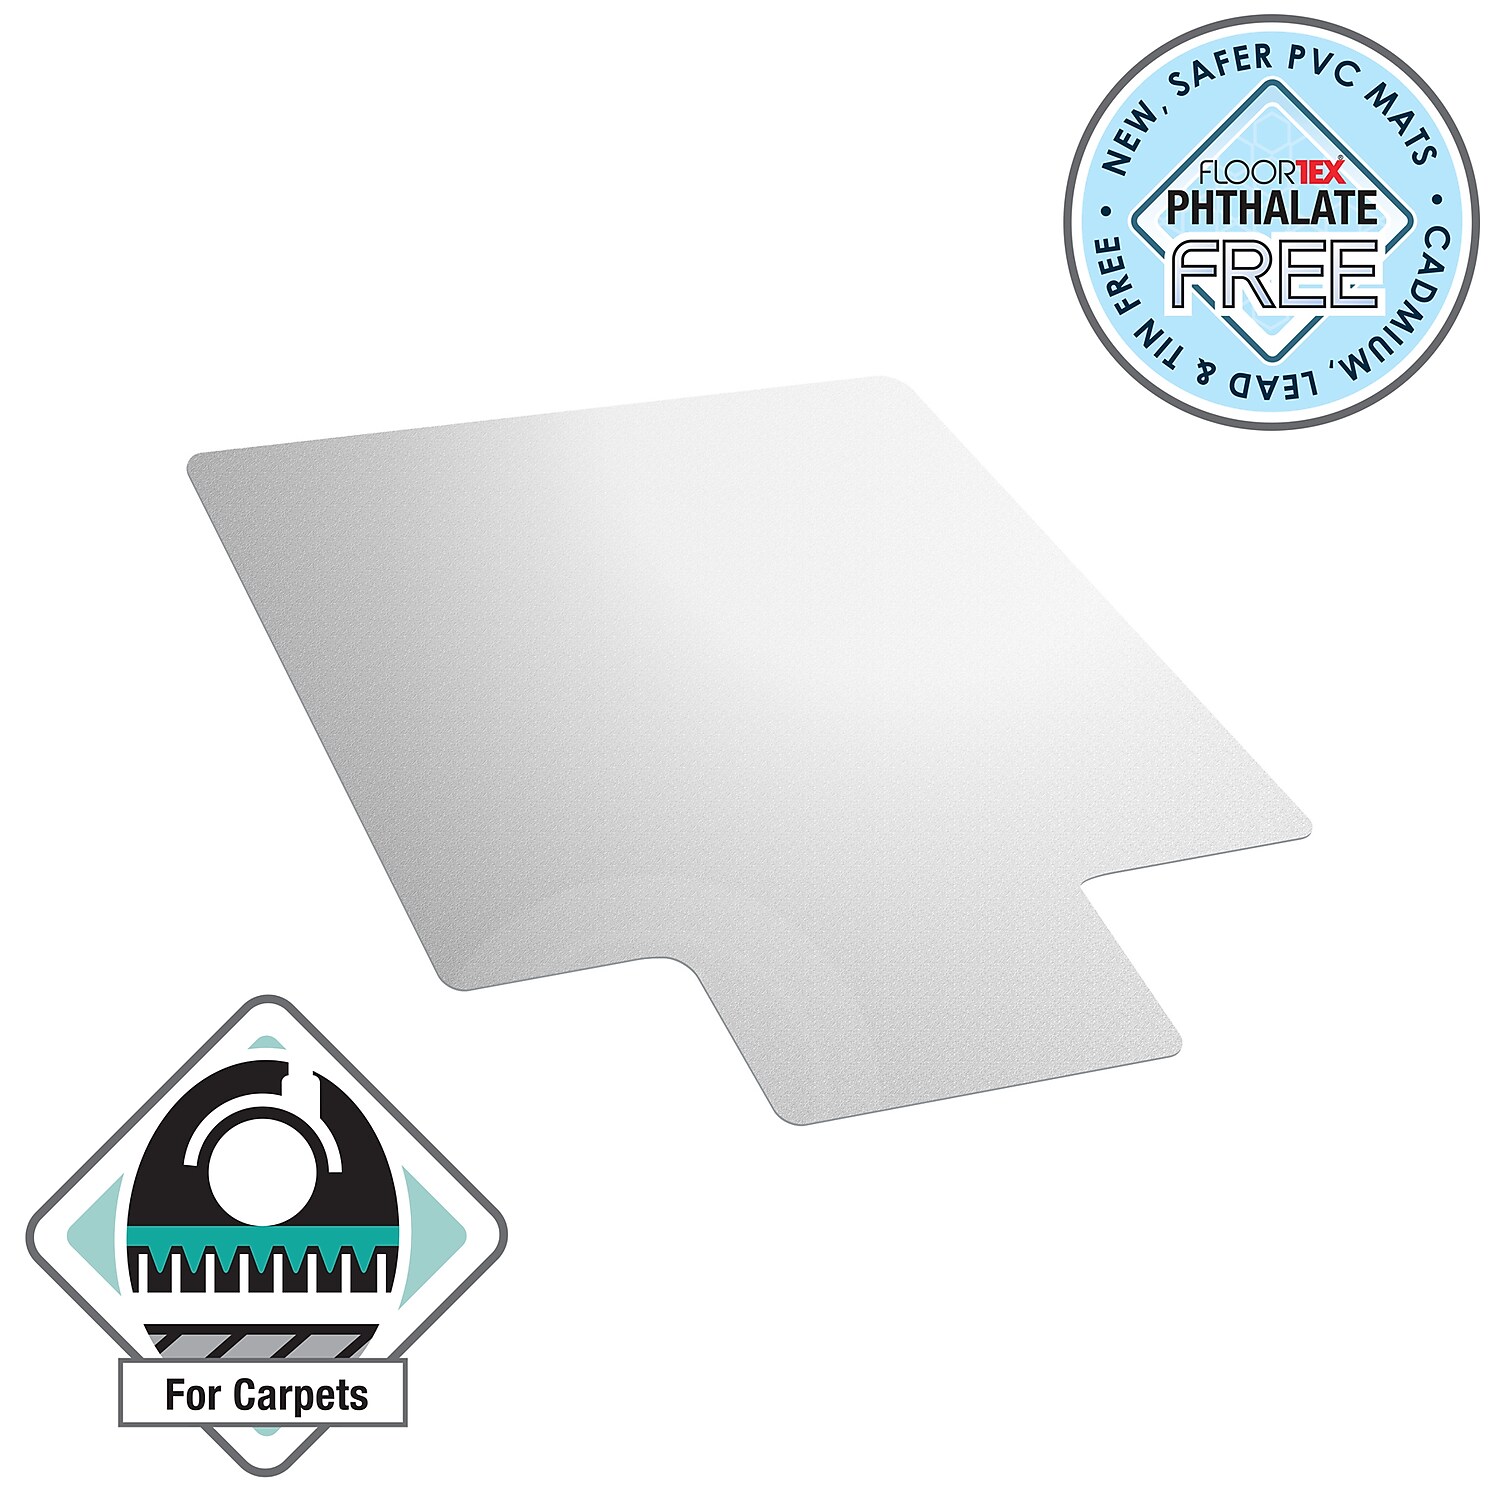 Advantagemat® Vinyl Lipped Chair Mat for Carpets up to 3/8" - 45" x 53" - image 3 of 12